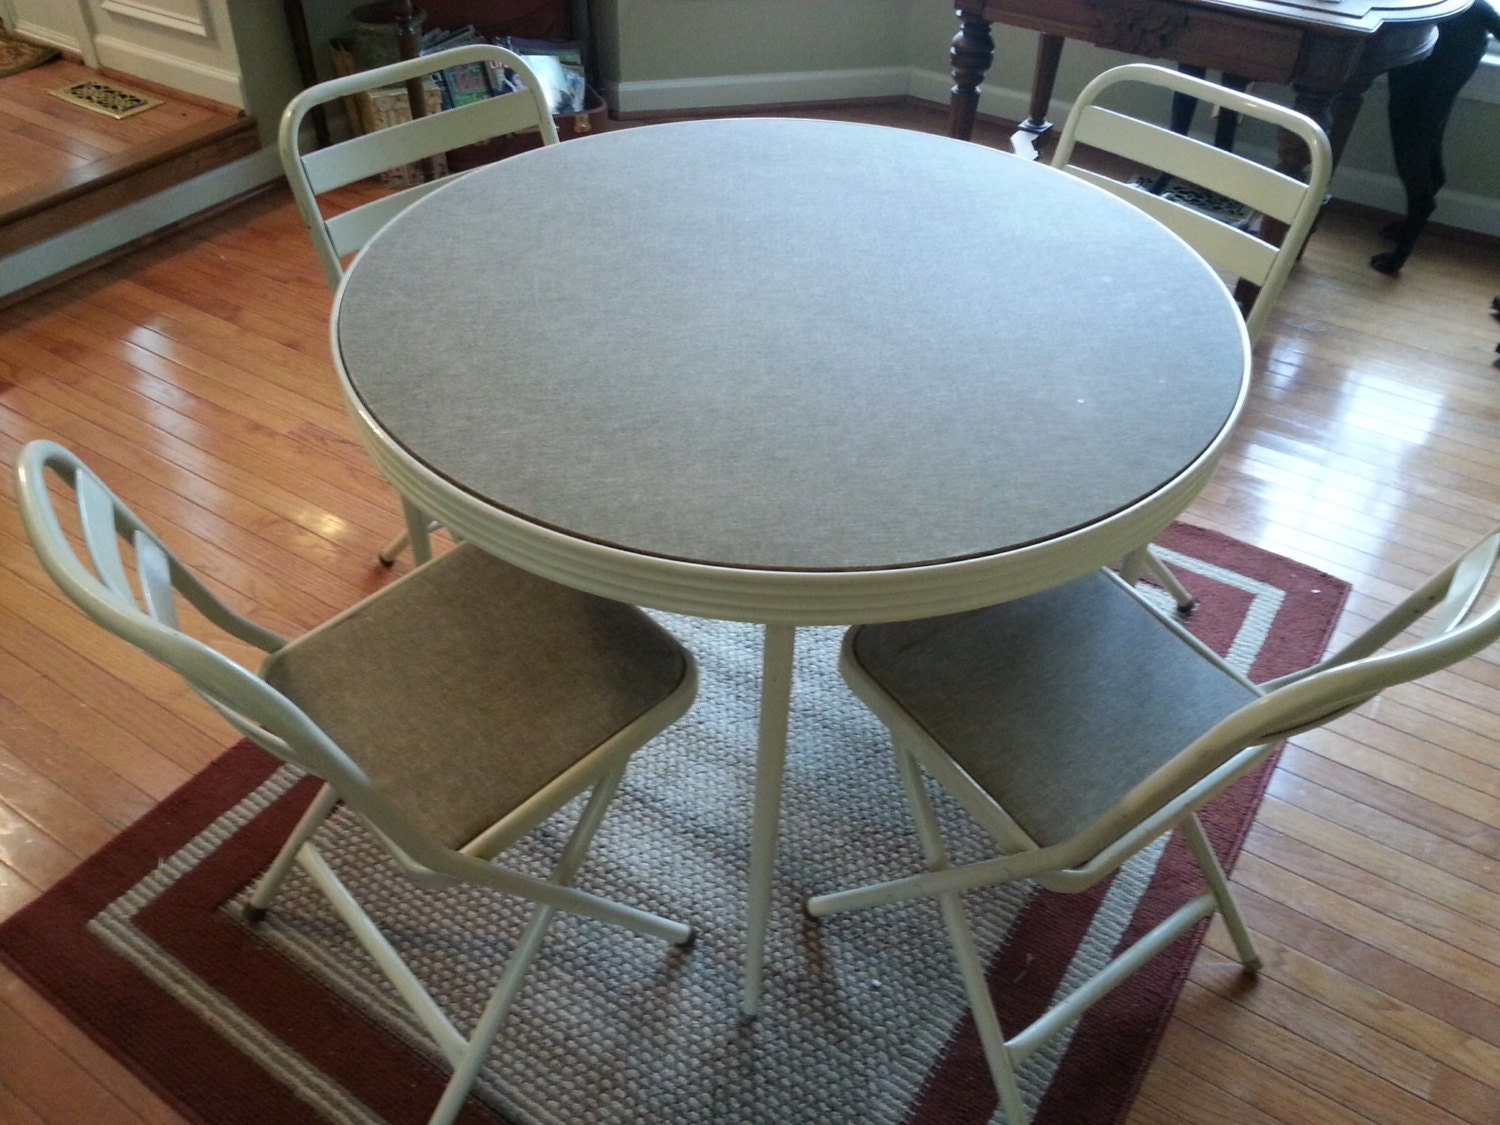 Durham Vinyl And Metal Round Card Table, Vintage Round Card Table And Chairs